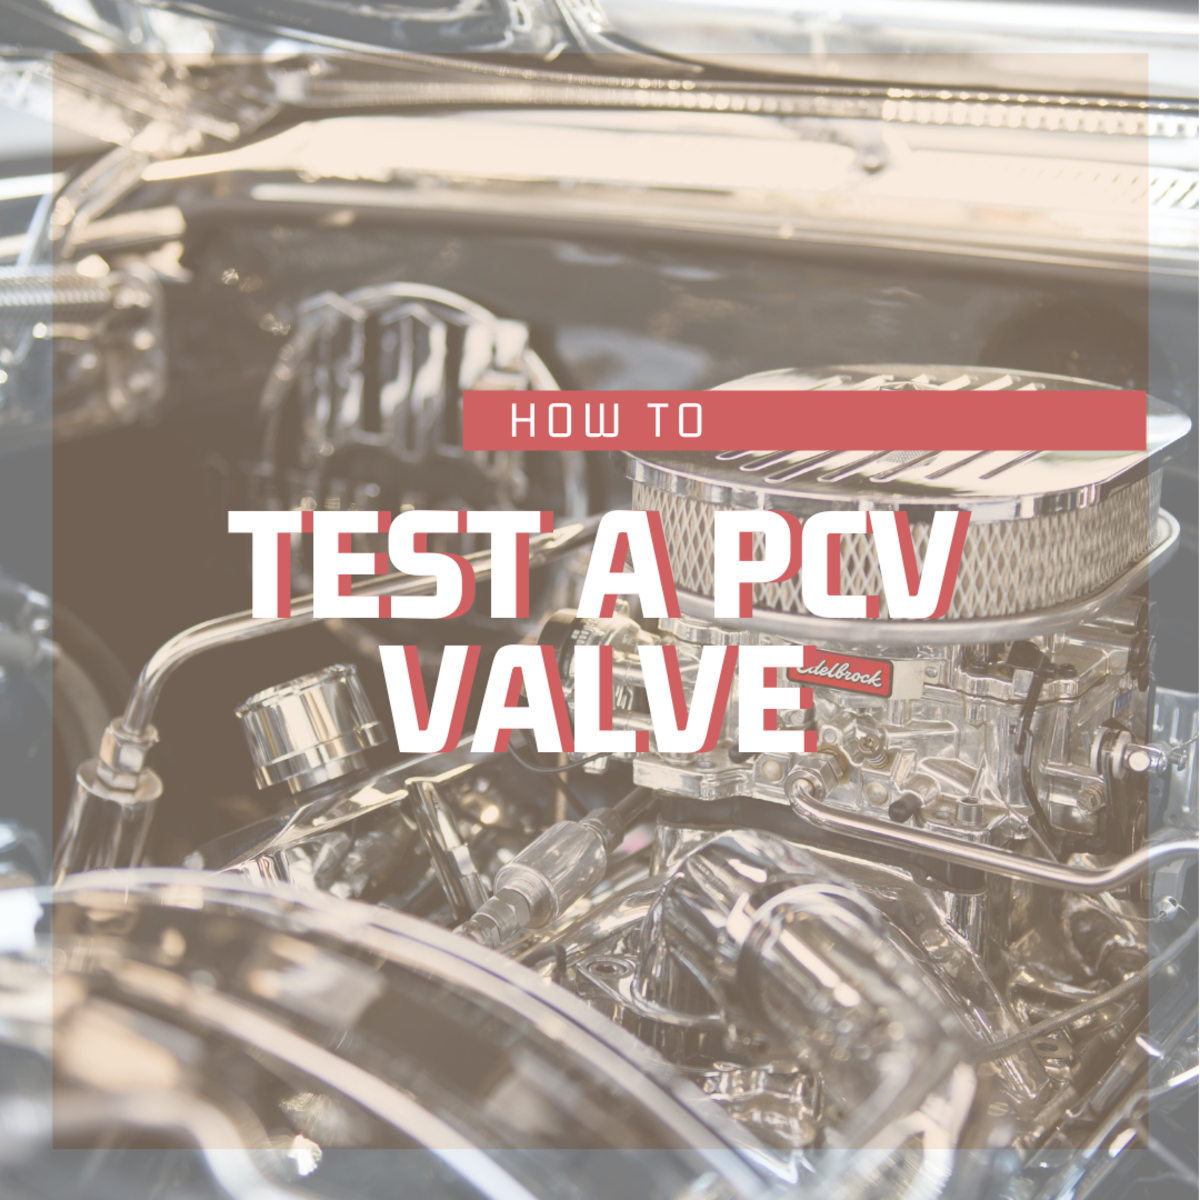 Bad PCV Valve Symptoms and How to Test the PCV Valve Yourself